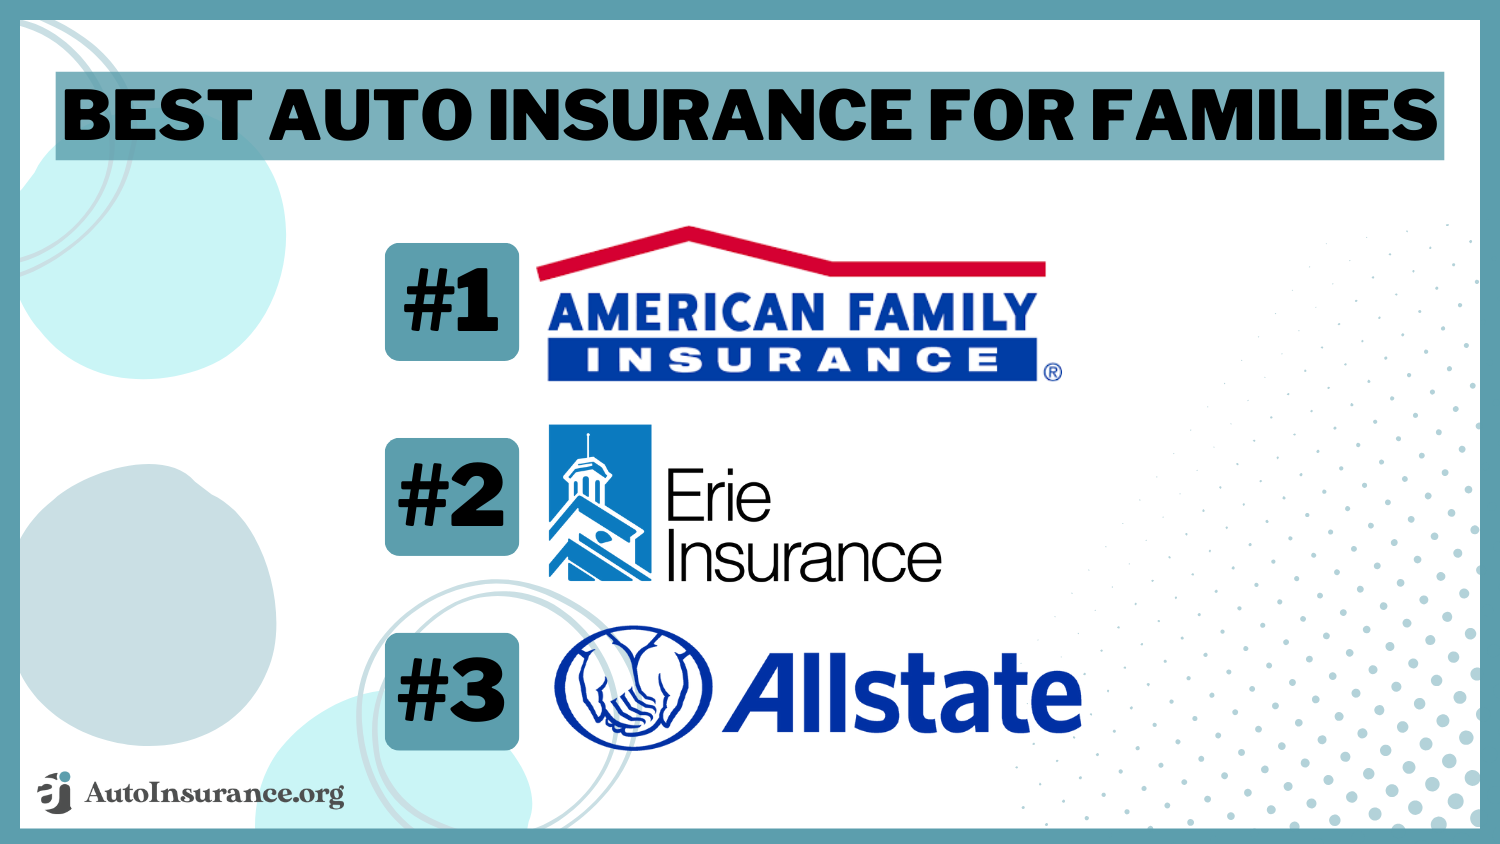 Best Auto Insurance for Families: American Family, Erie, and Allstate